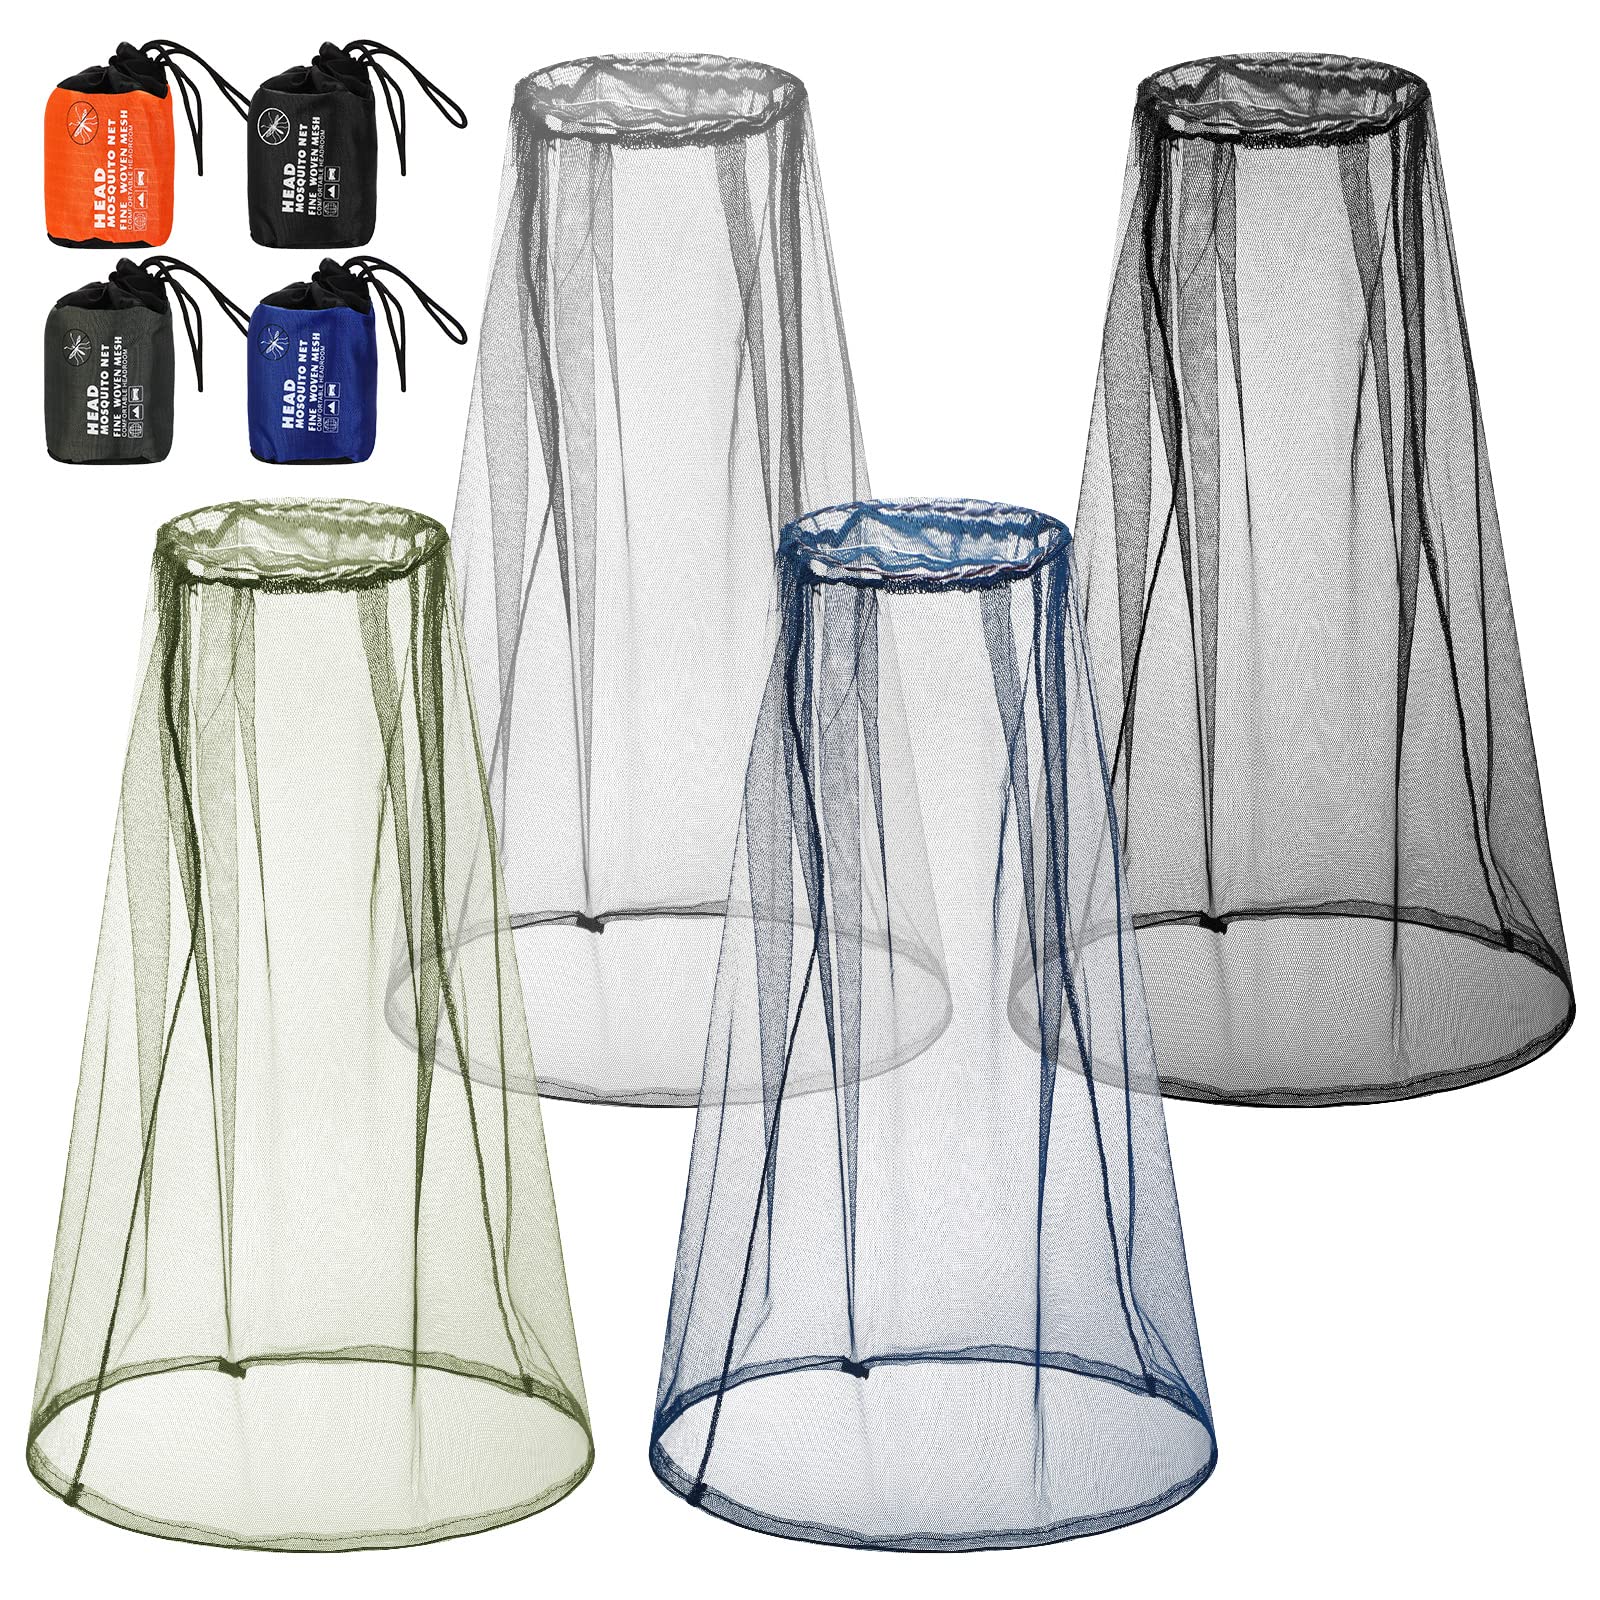 4 Pack Mosquito Head Net Face Mesh Net Head Protecting Net for